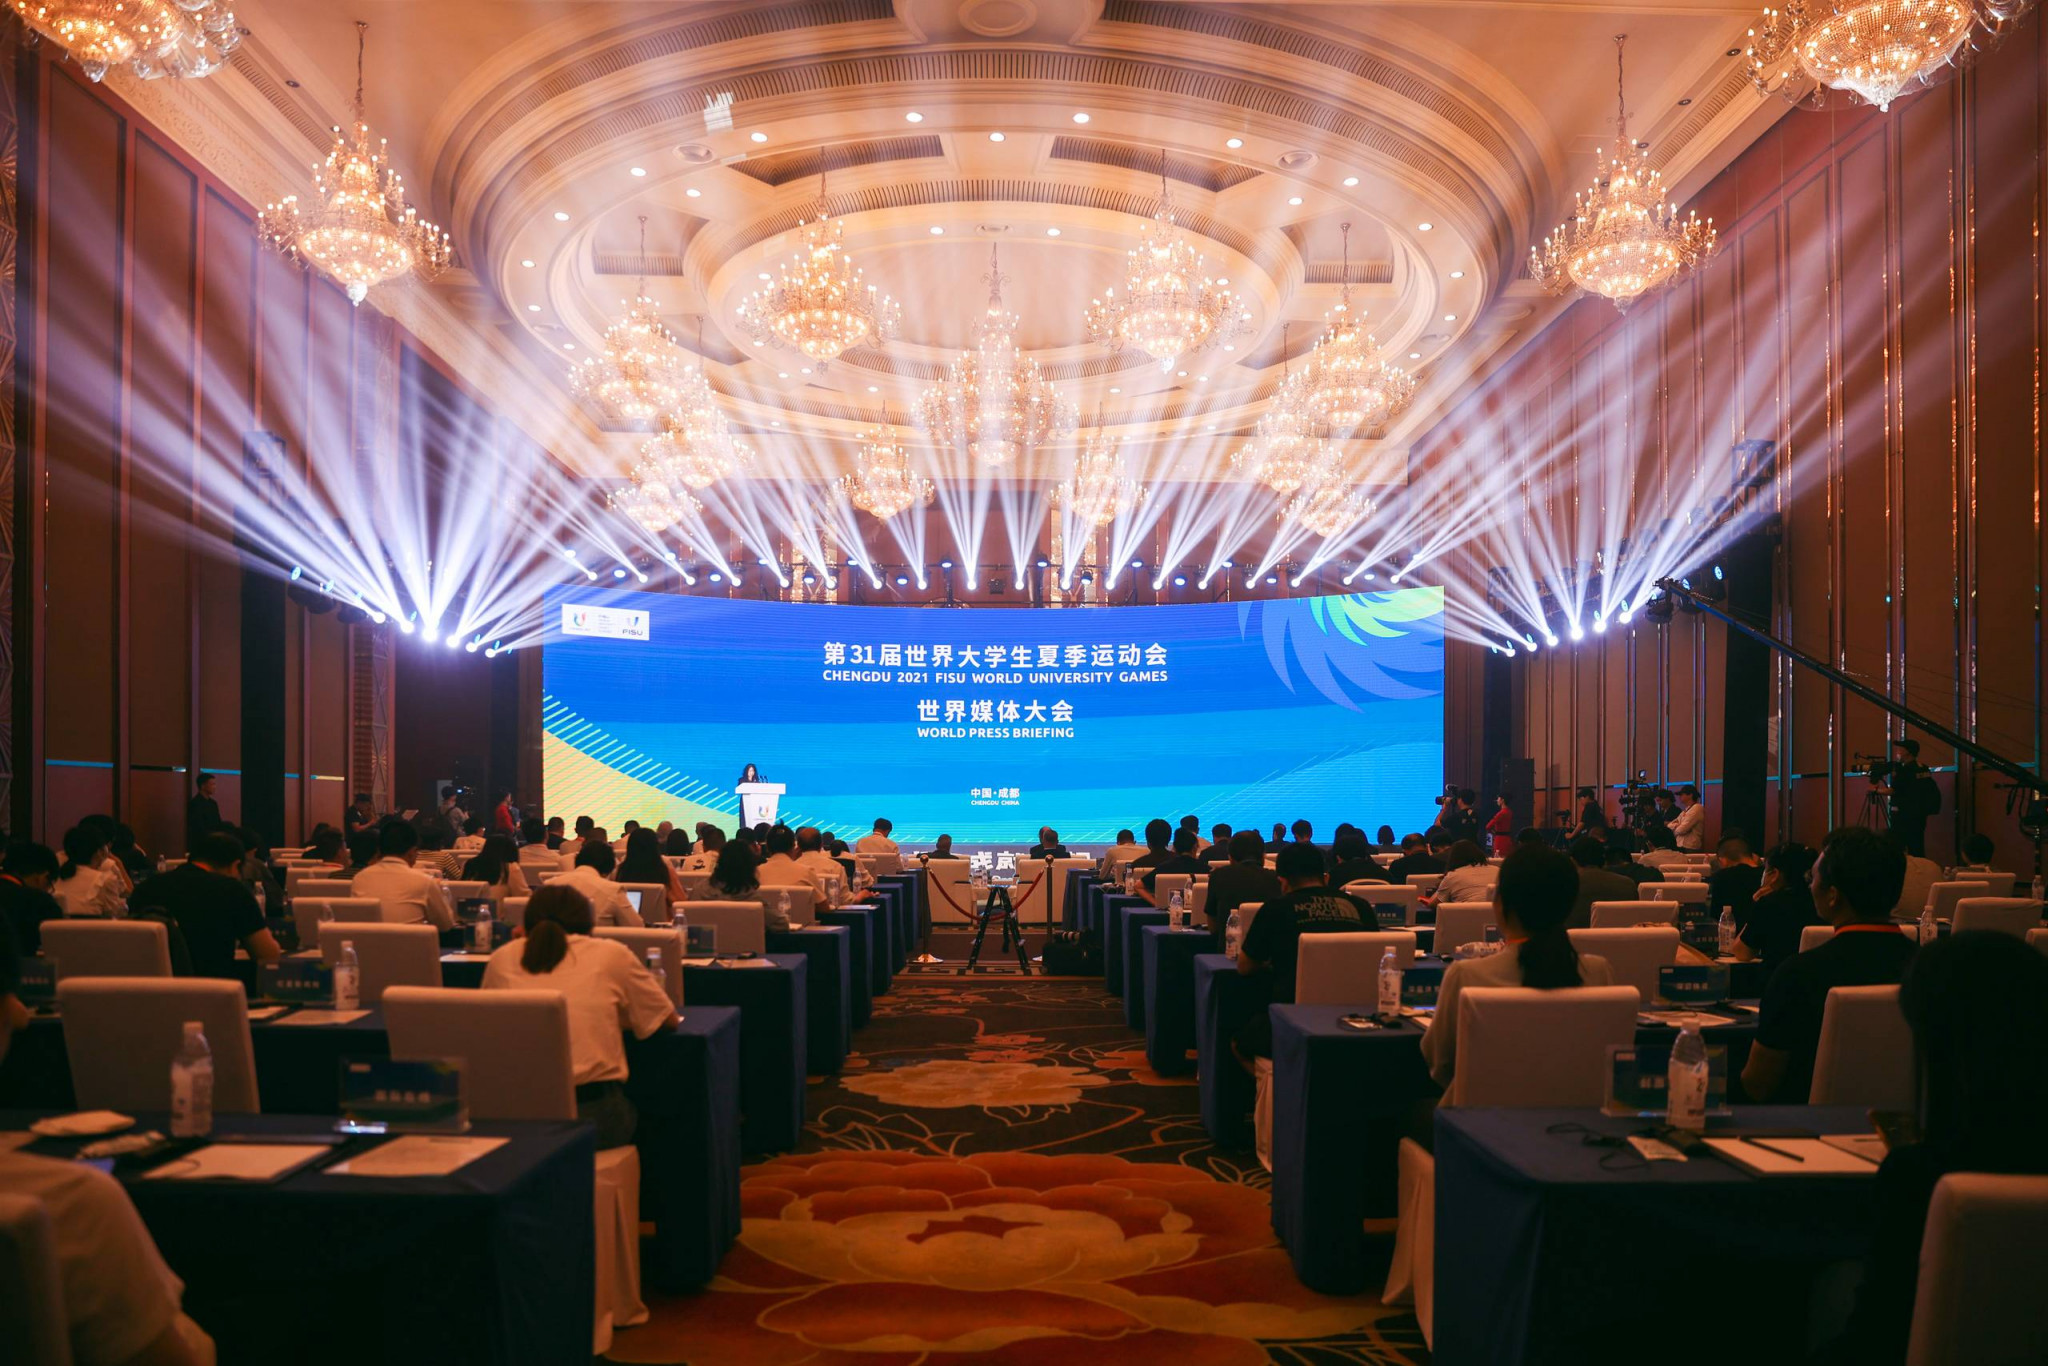 More than 100 attend world press briefing for FISU Games in Chengdu